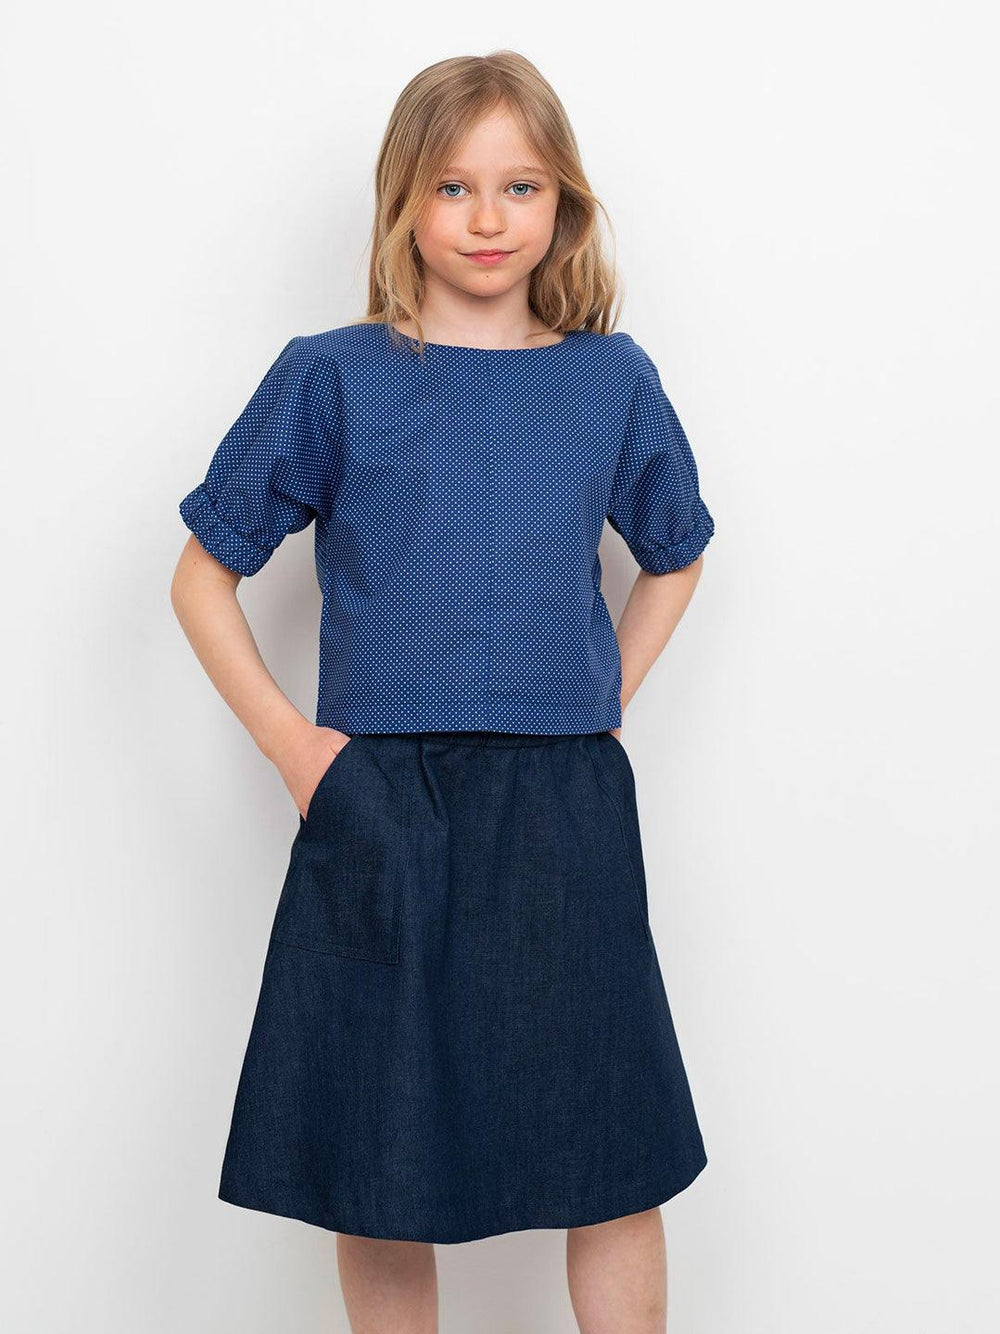 Child wearing the Children's Cuff Top Mini sewing pattern from The Assembly Line on The Fold Line. A top pattern made in light to mid-weight fabrics, featuring a straight fit, round neck, keyhole opening with snap fastener at the back and cap sleeves with